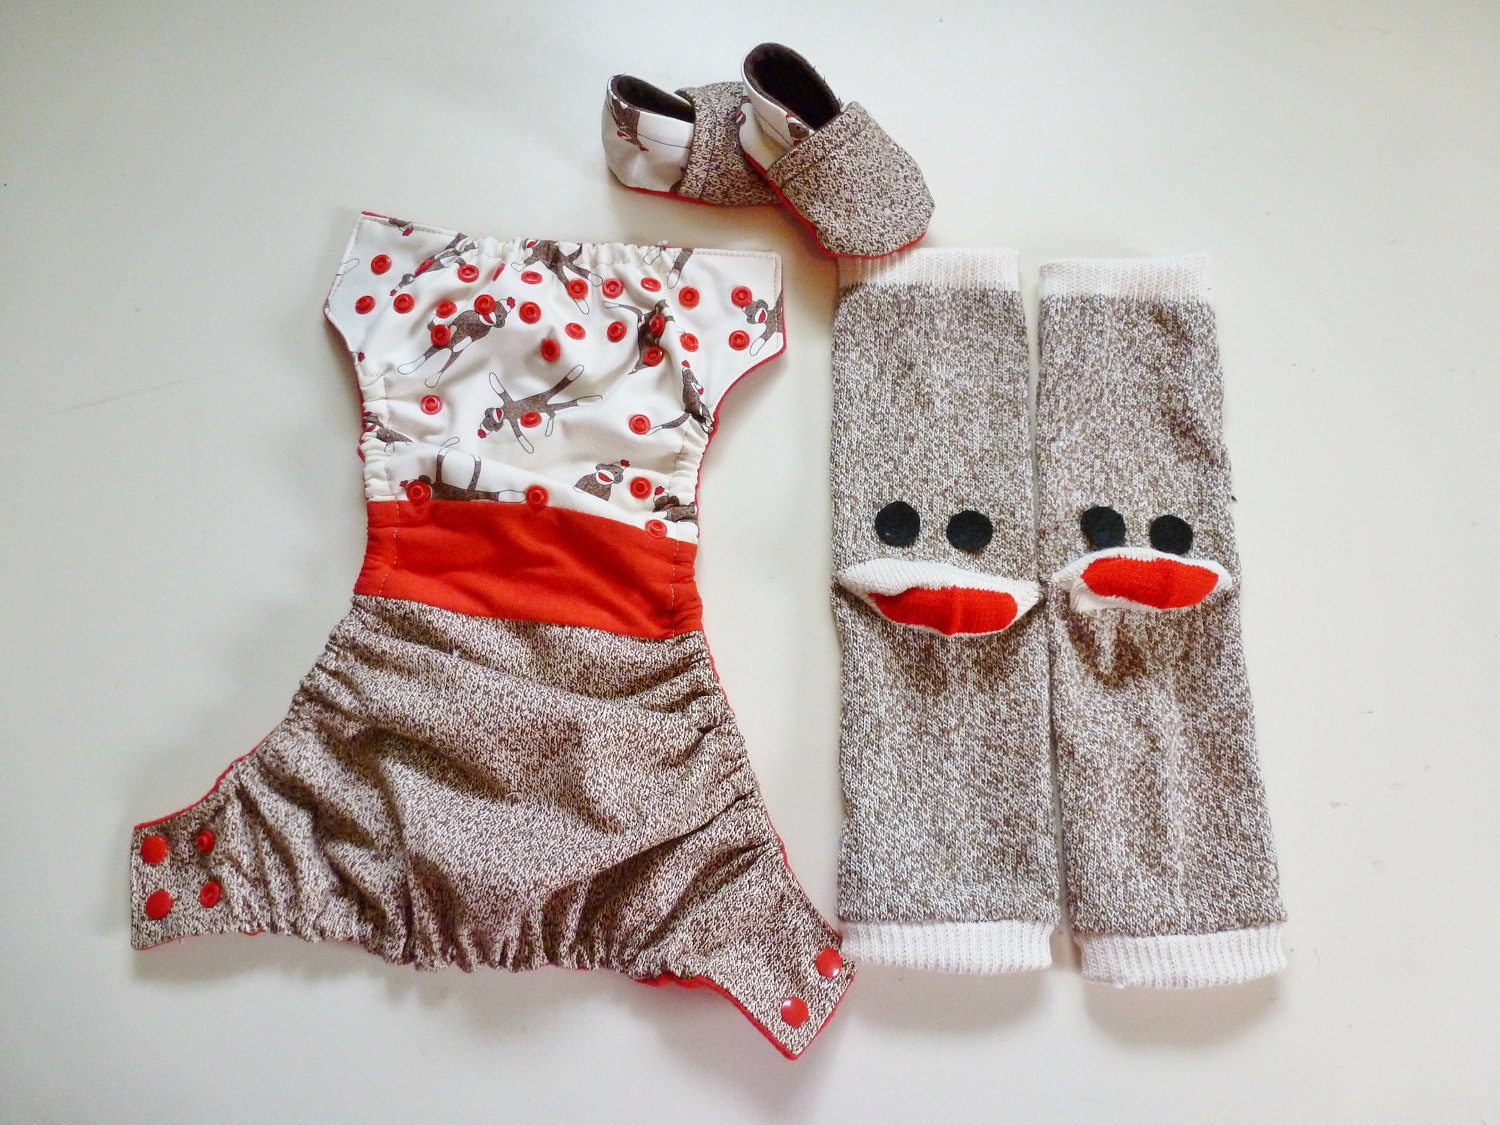 Sock Monkey One Size Pocket Diaper, Leg Warmers and Soft Soled Shoes Gift Set